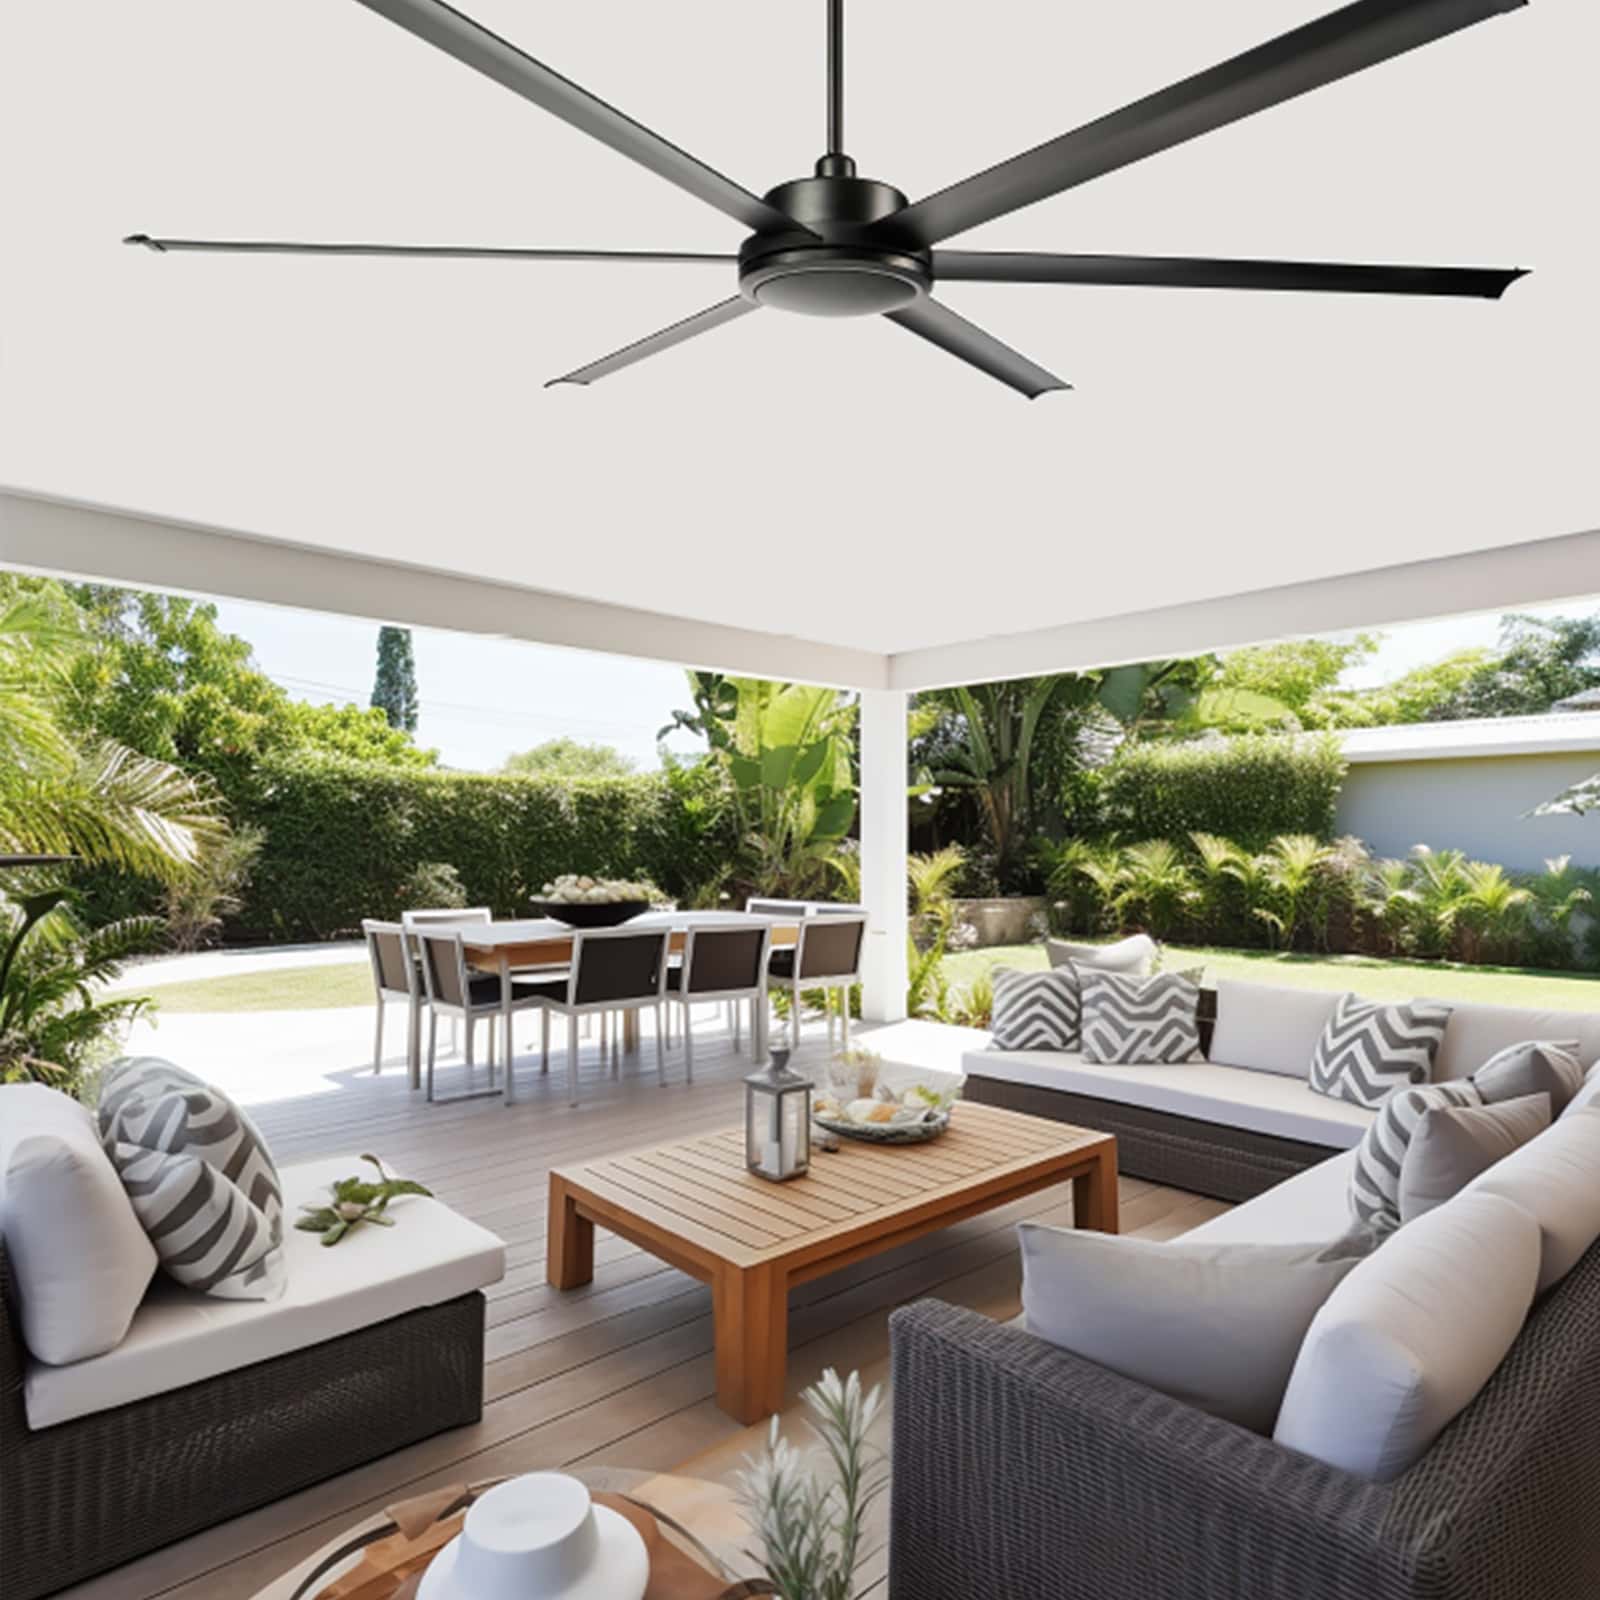 Colossus 84 inch DC Ceiling Fan in outdoor space_1